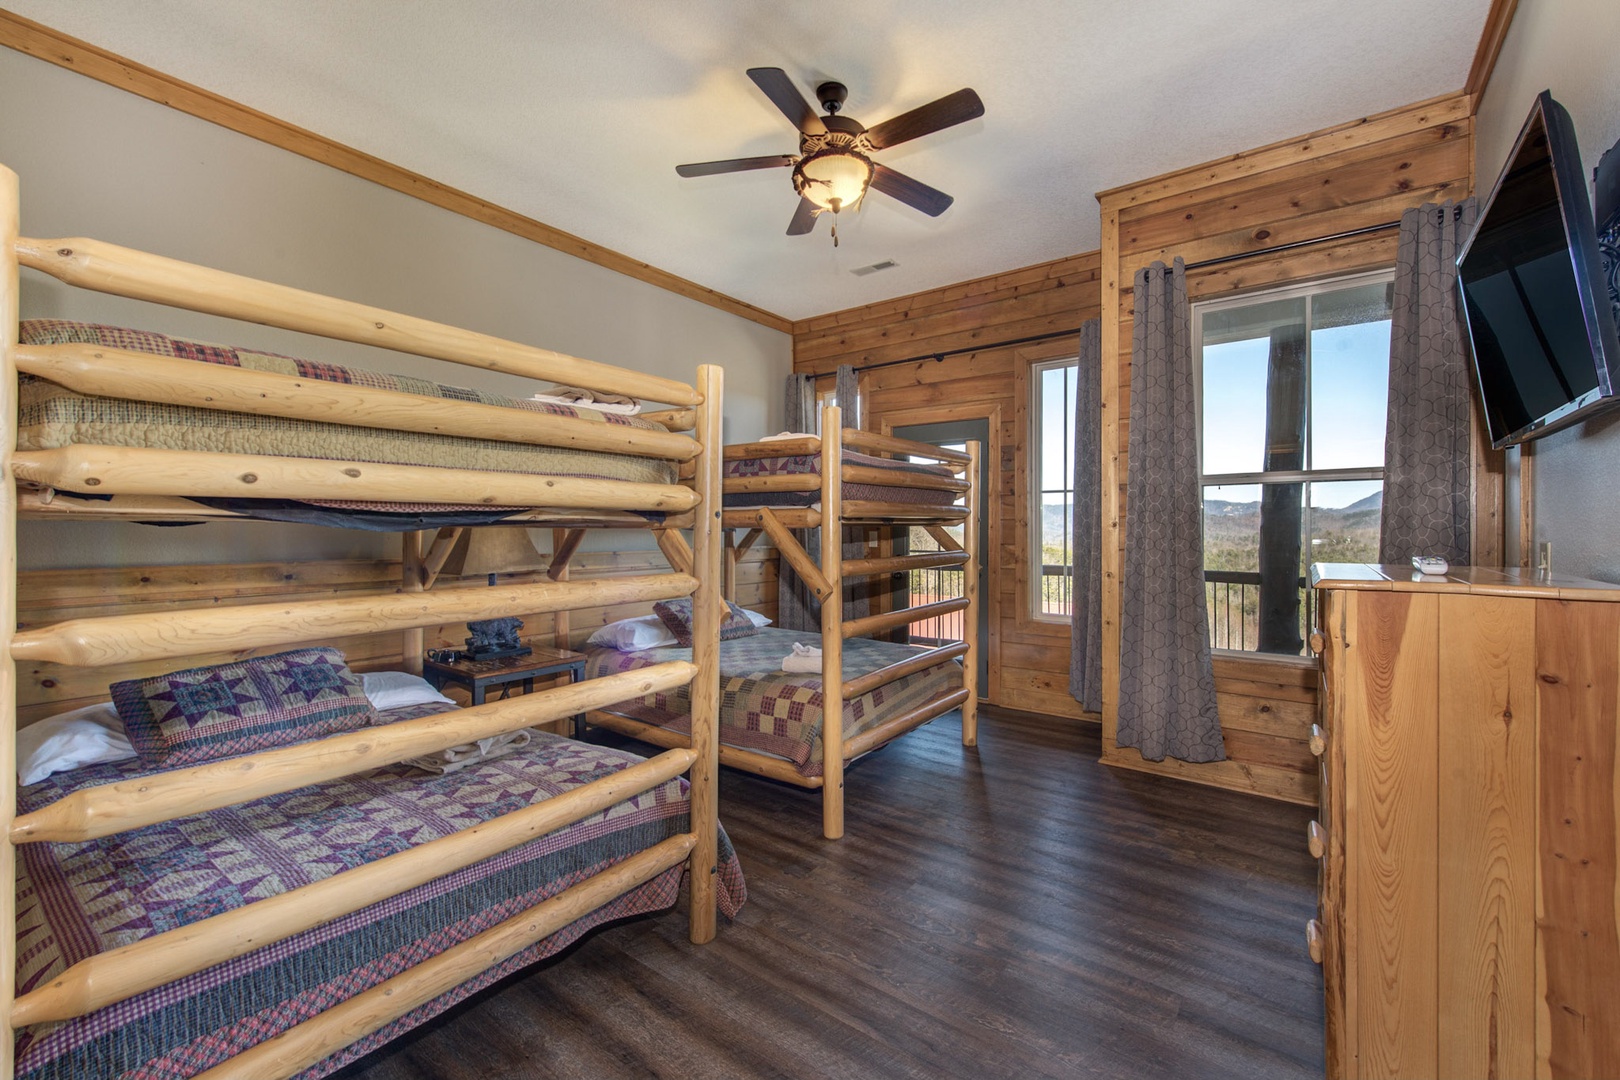 This upper-level balcony suite offers a pair of full bunkbeds, ensuite, & TV